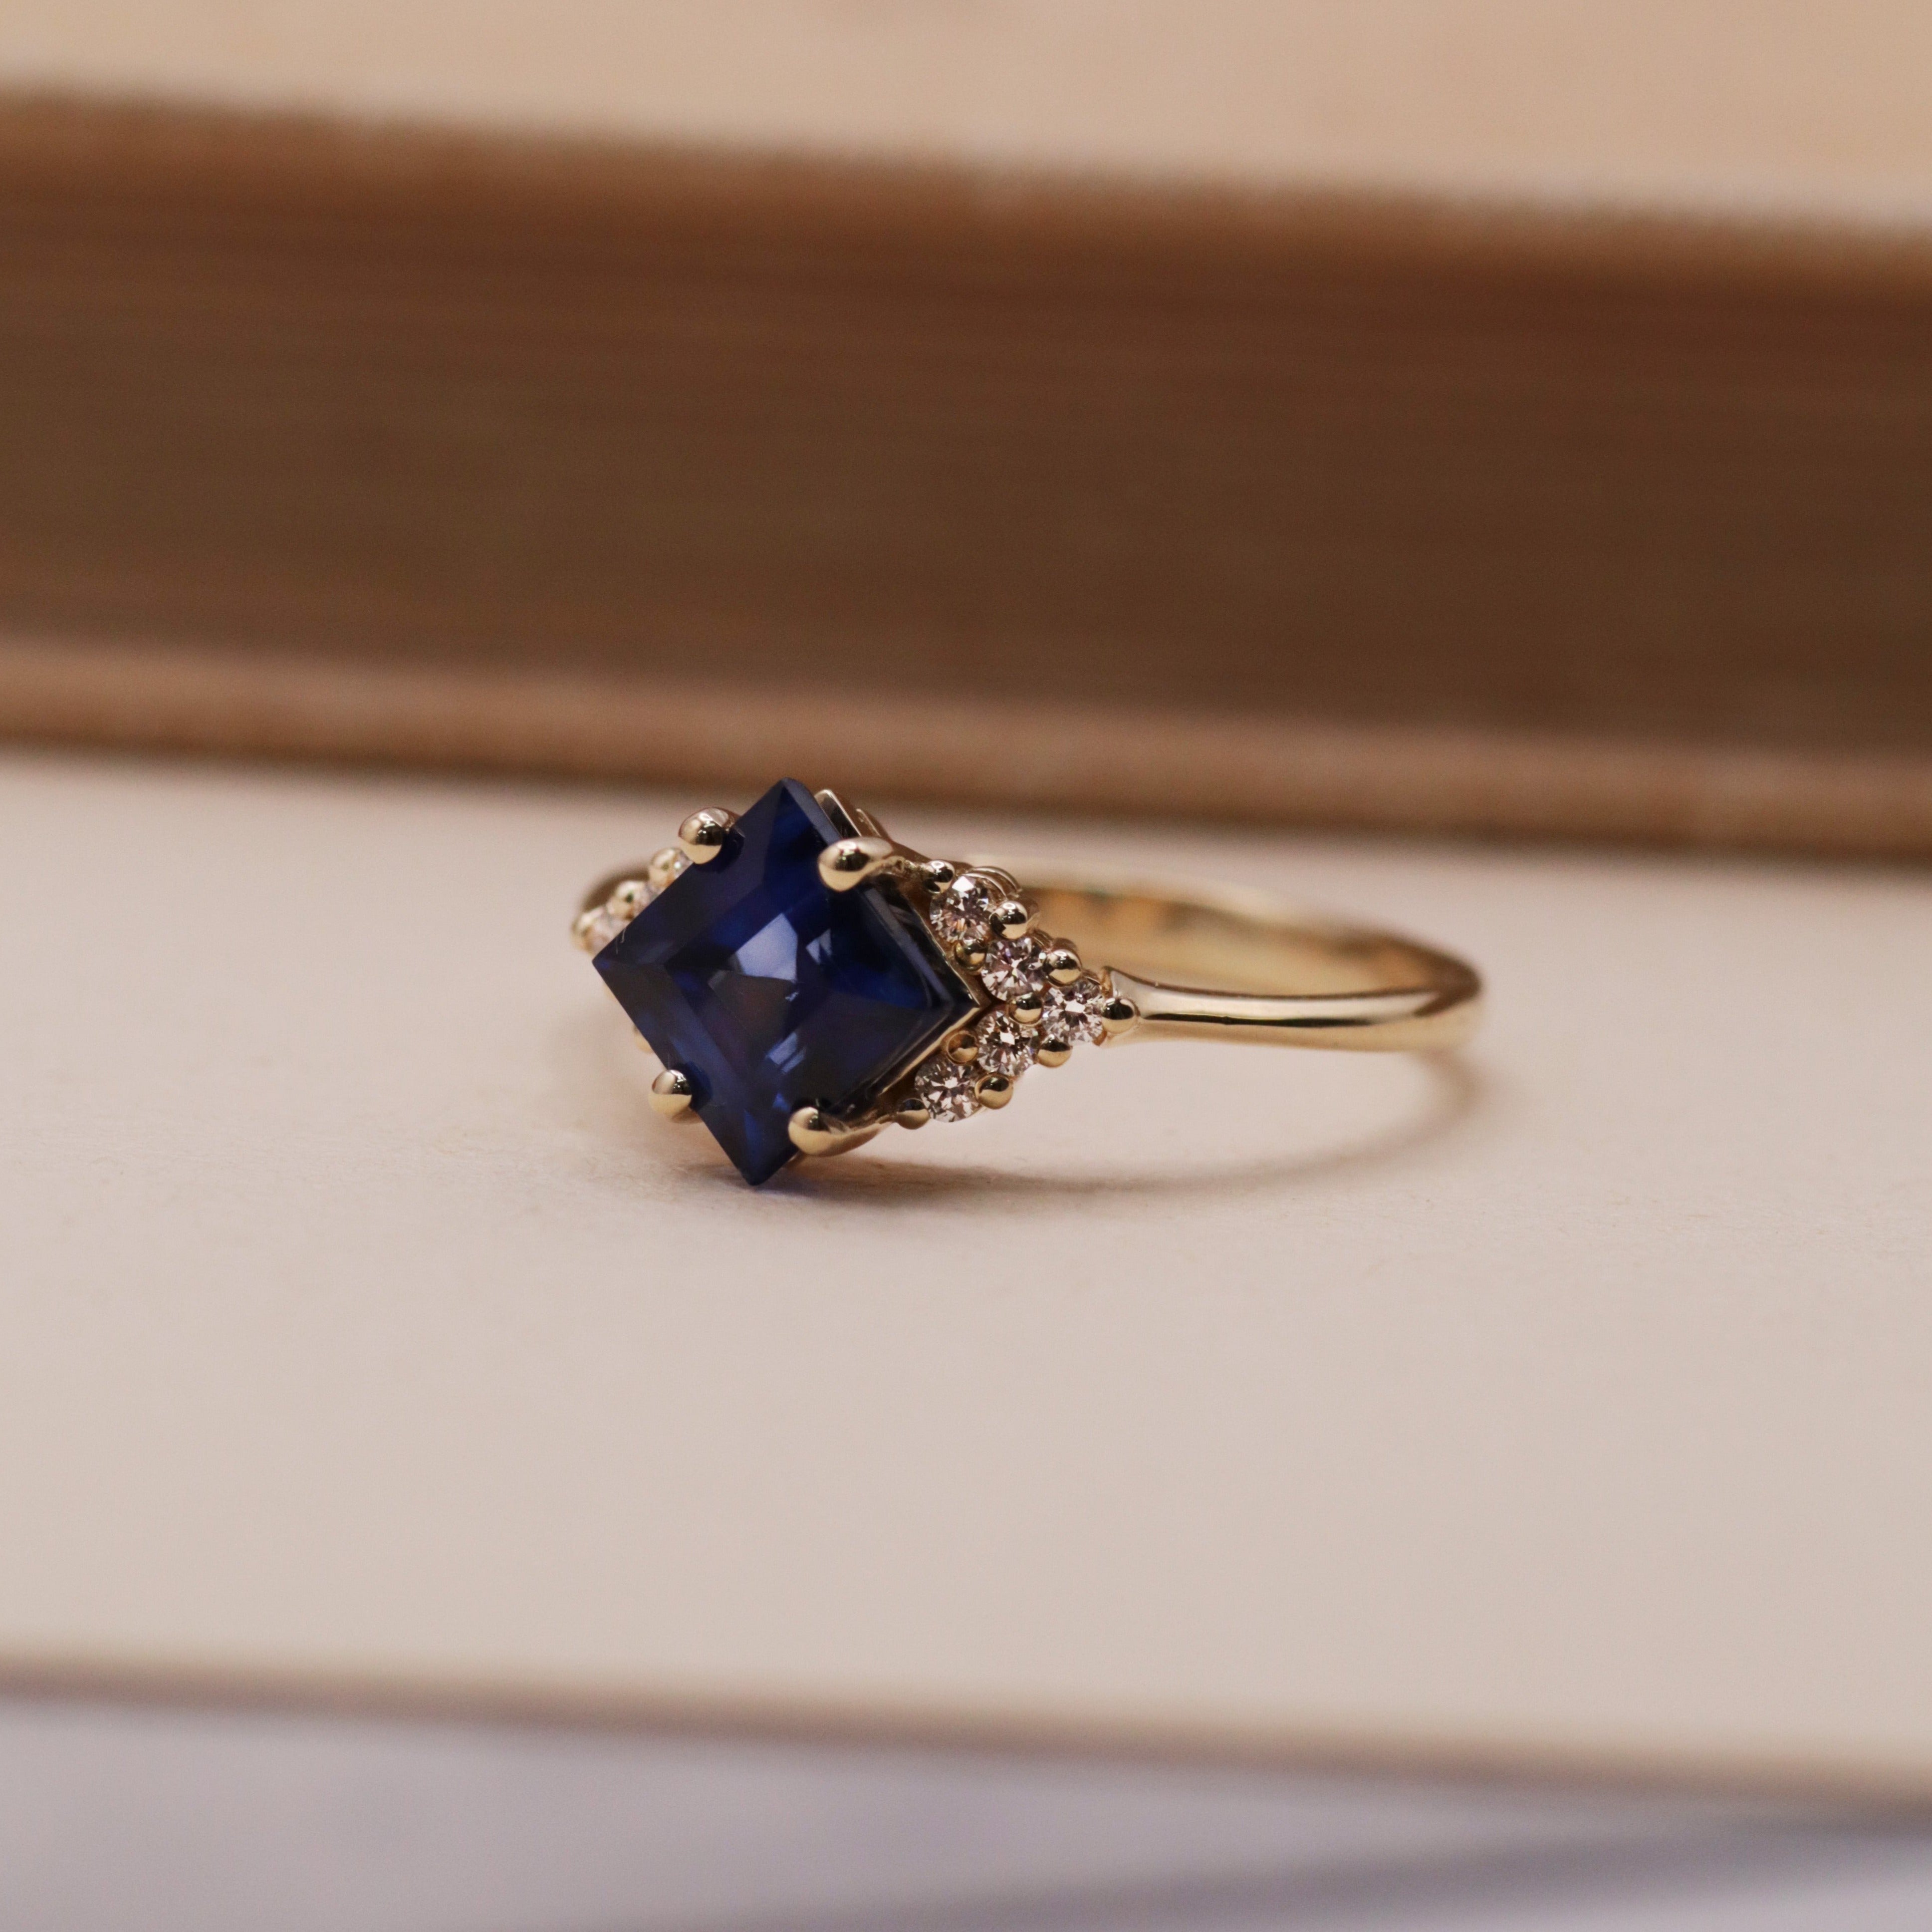 Juliette Ring With Diamonds and Blue Sapphire